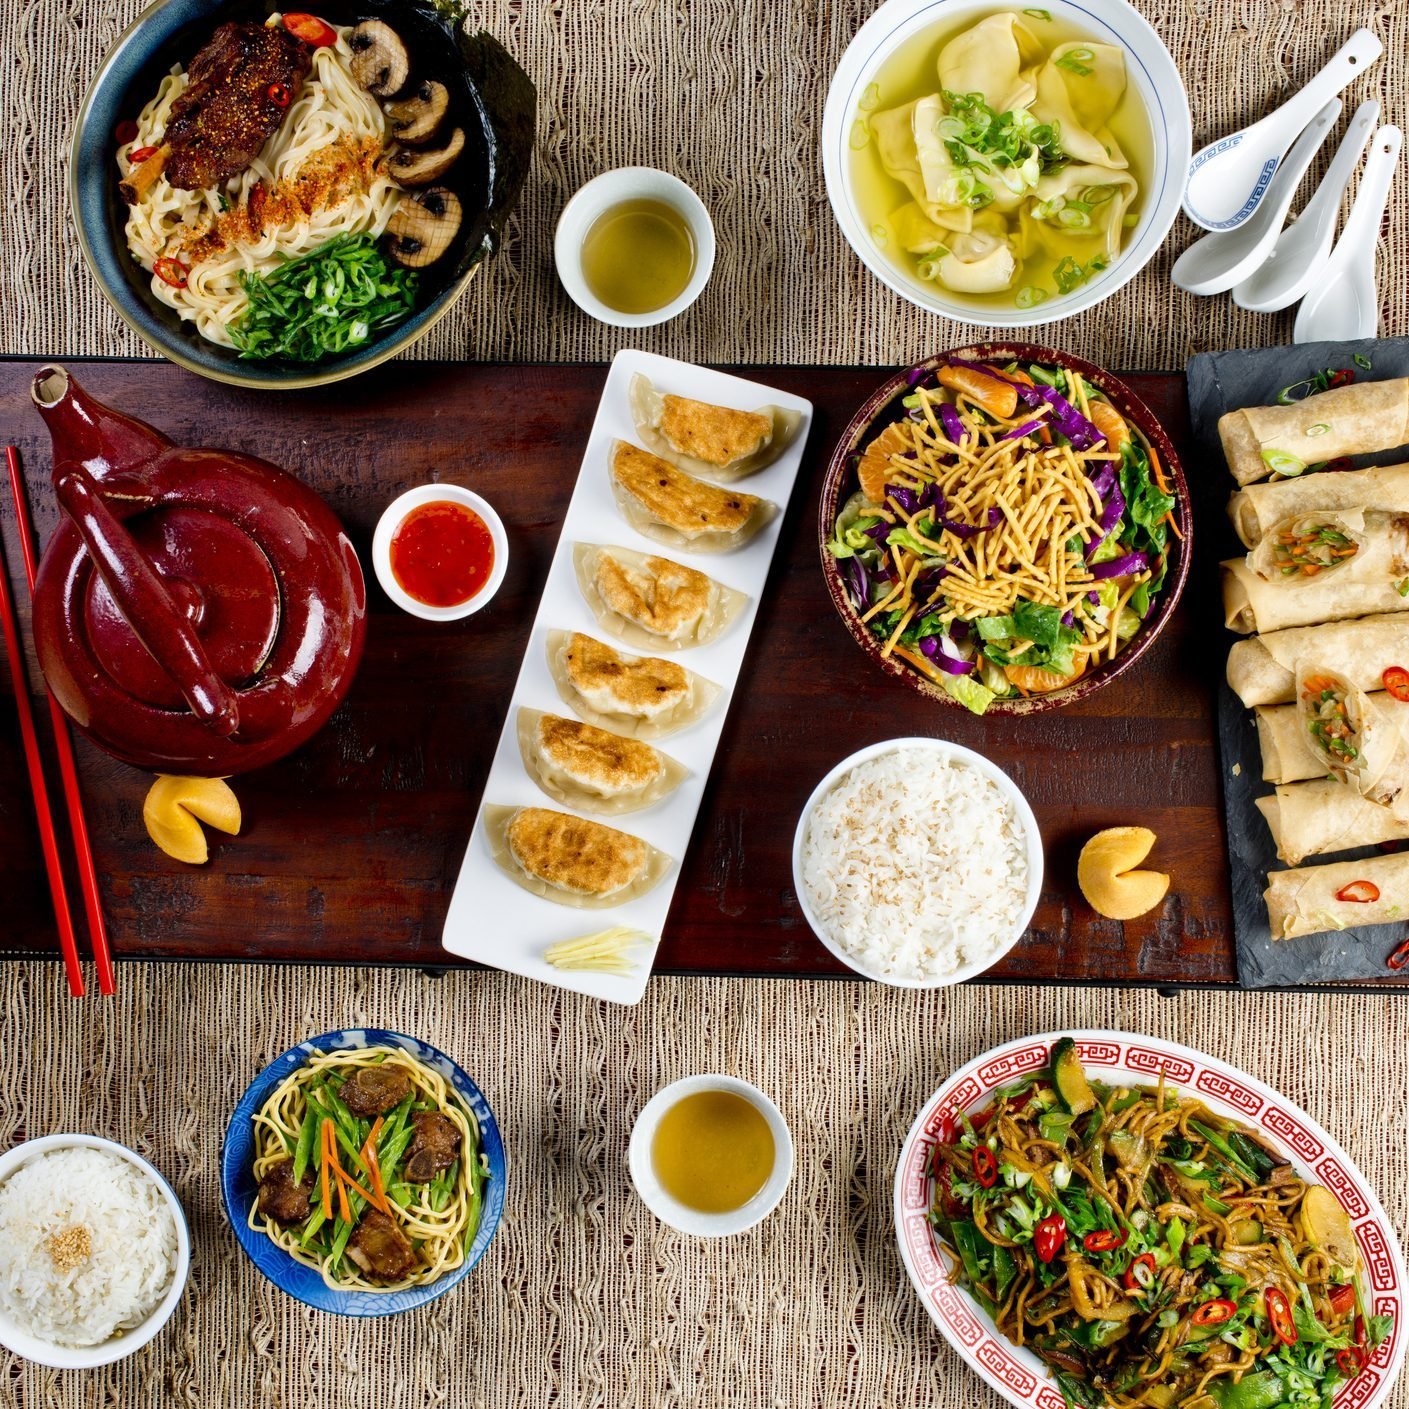 Lunar New Year recipes: How 5 Asian cooks from different cultures